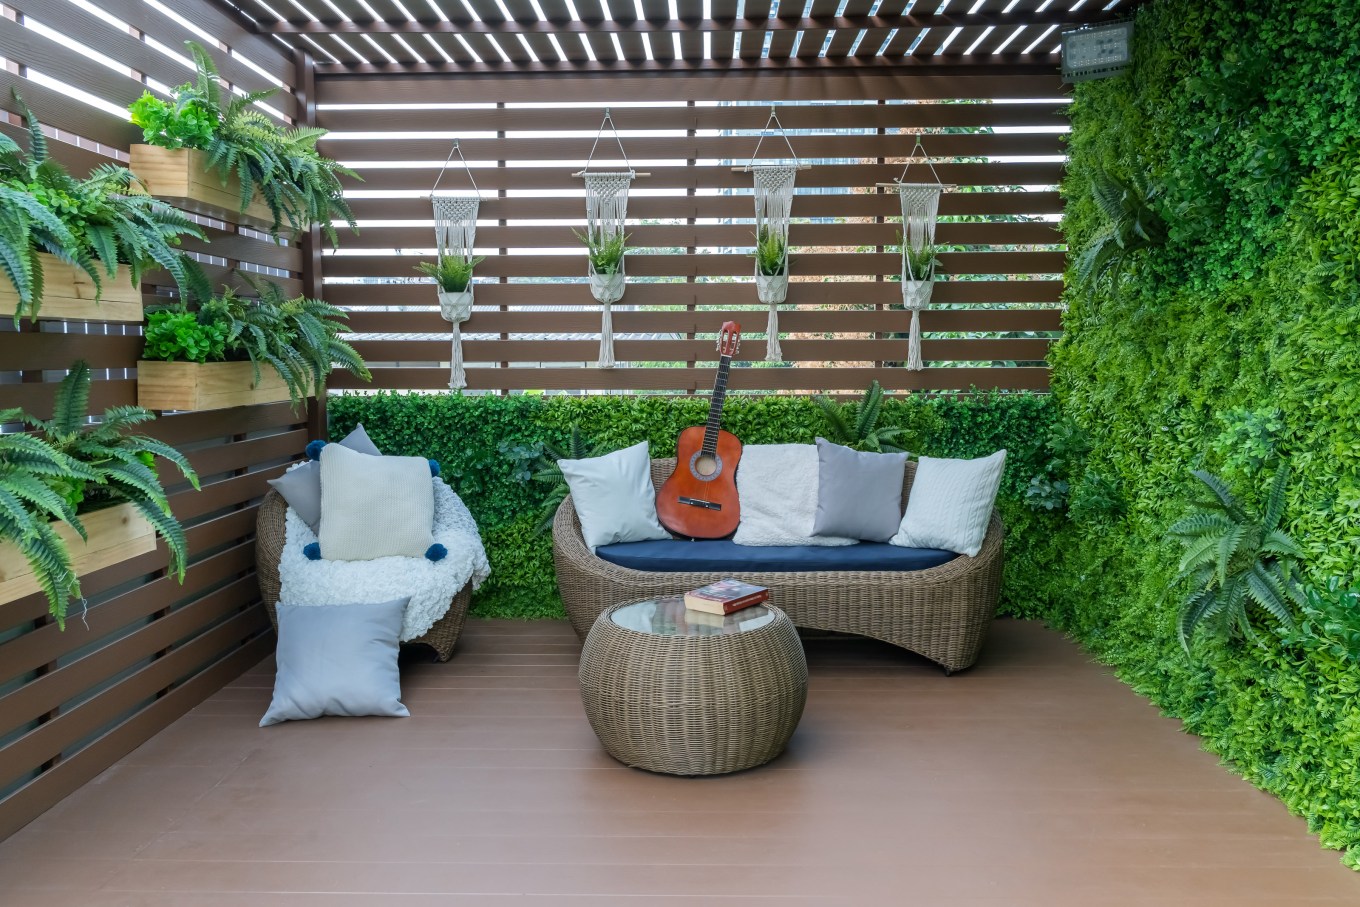 Seating in the garden on the balcony surrounded by plants, is a recreation place.